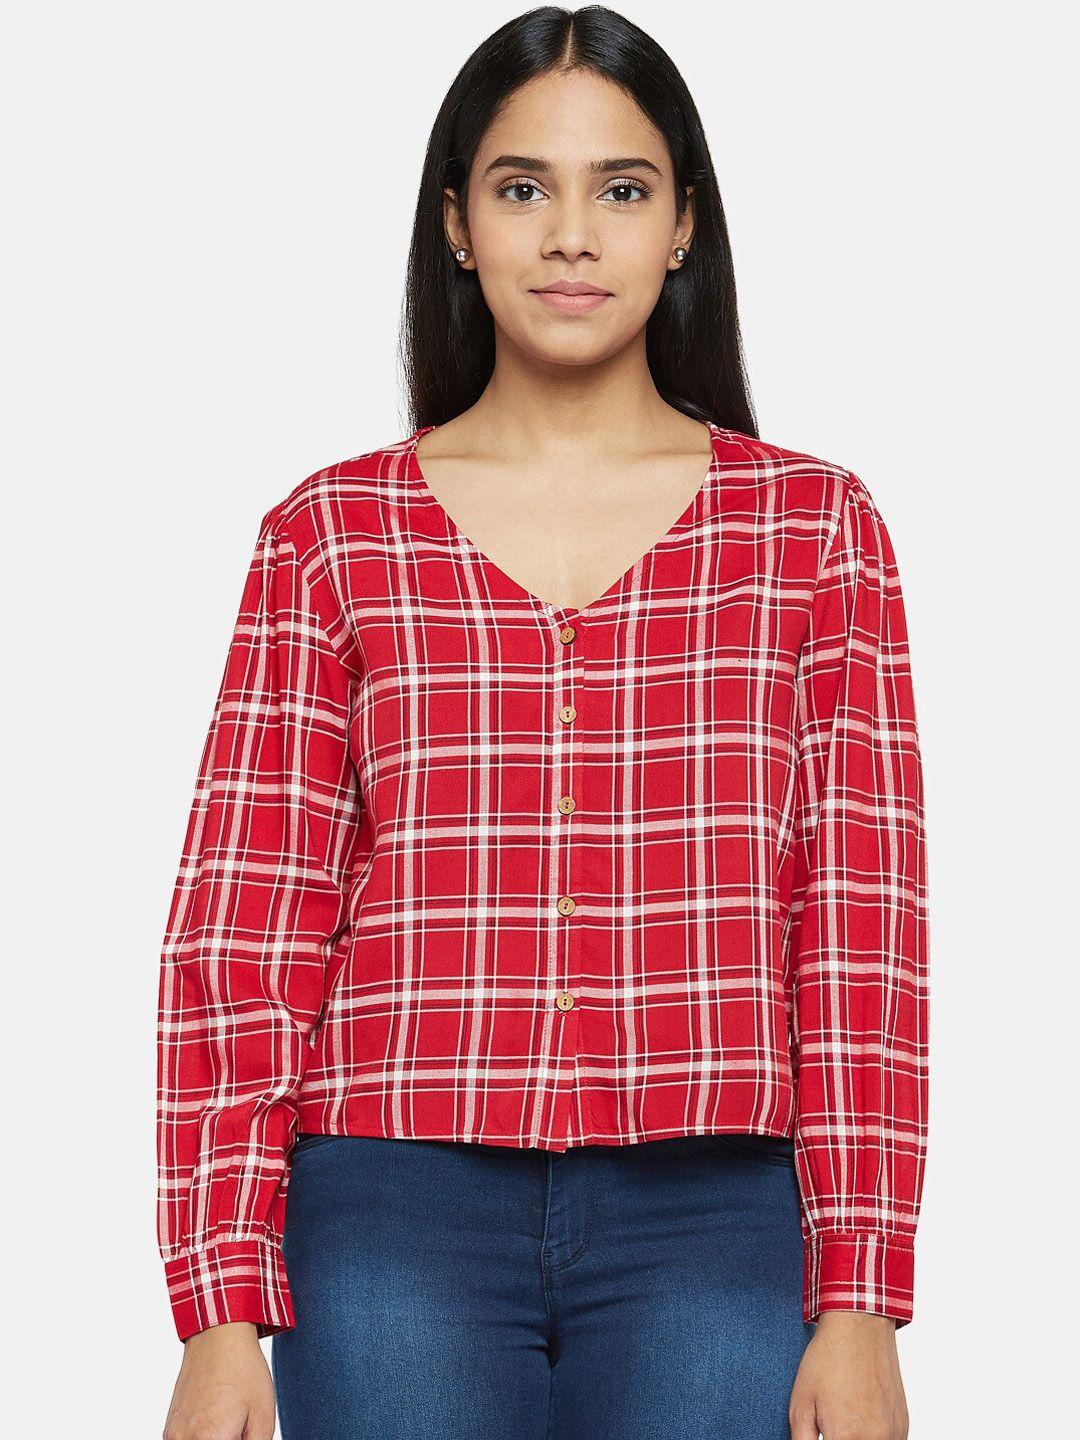 people red & white checked shirt style top